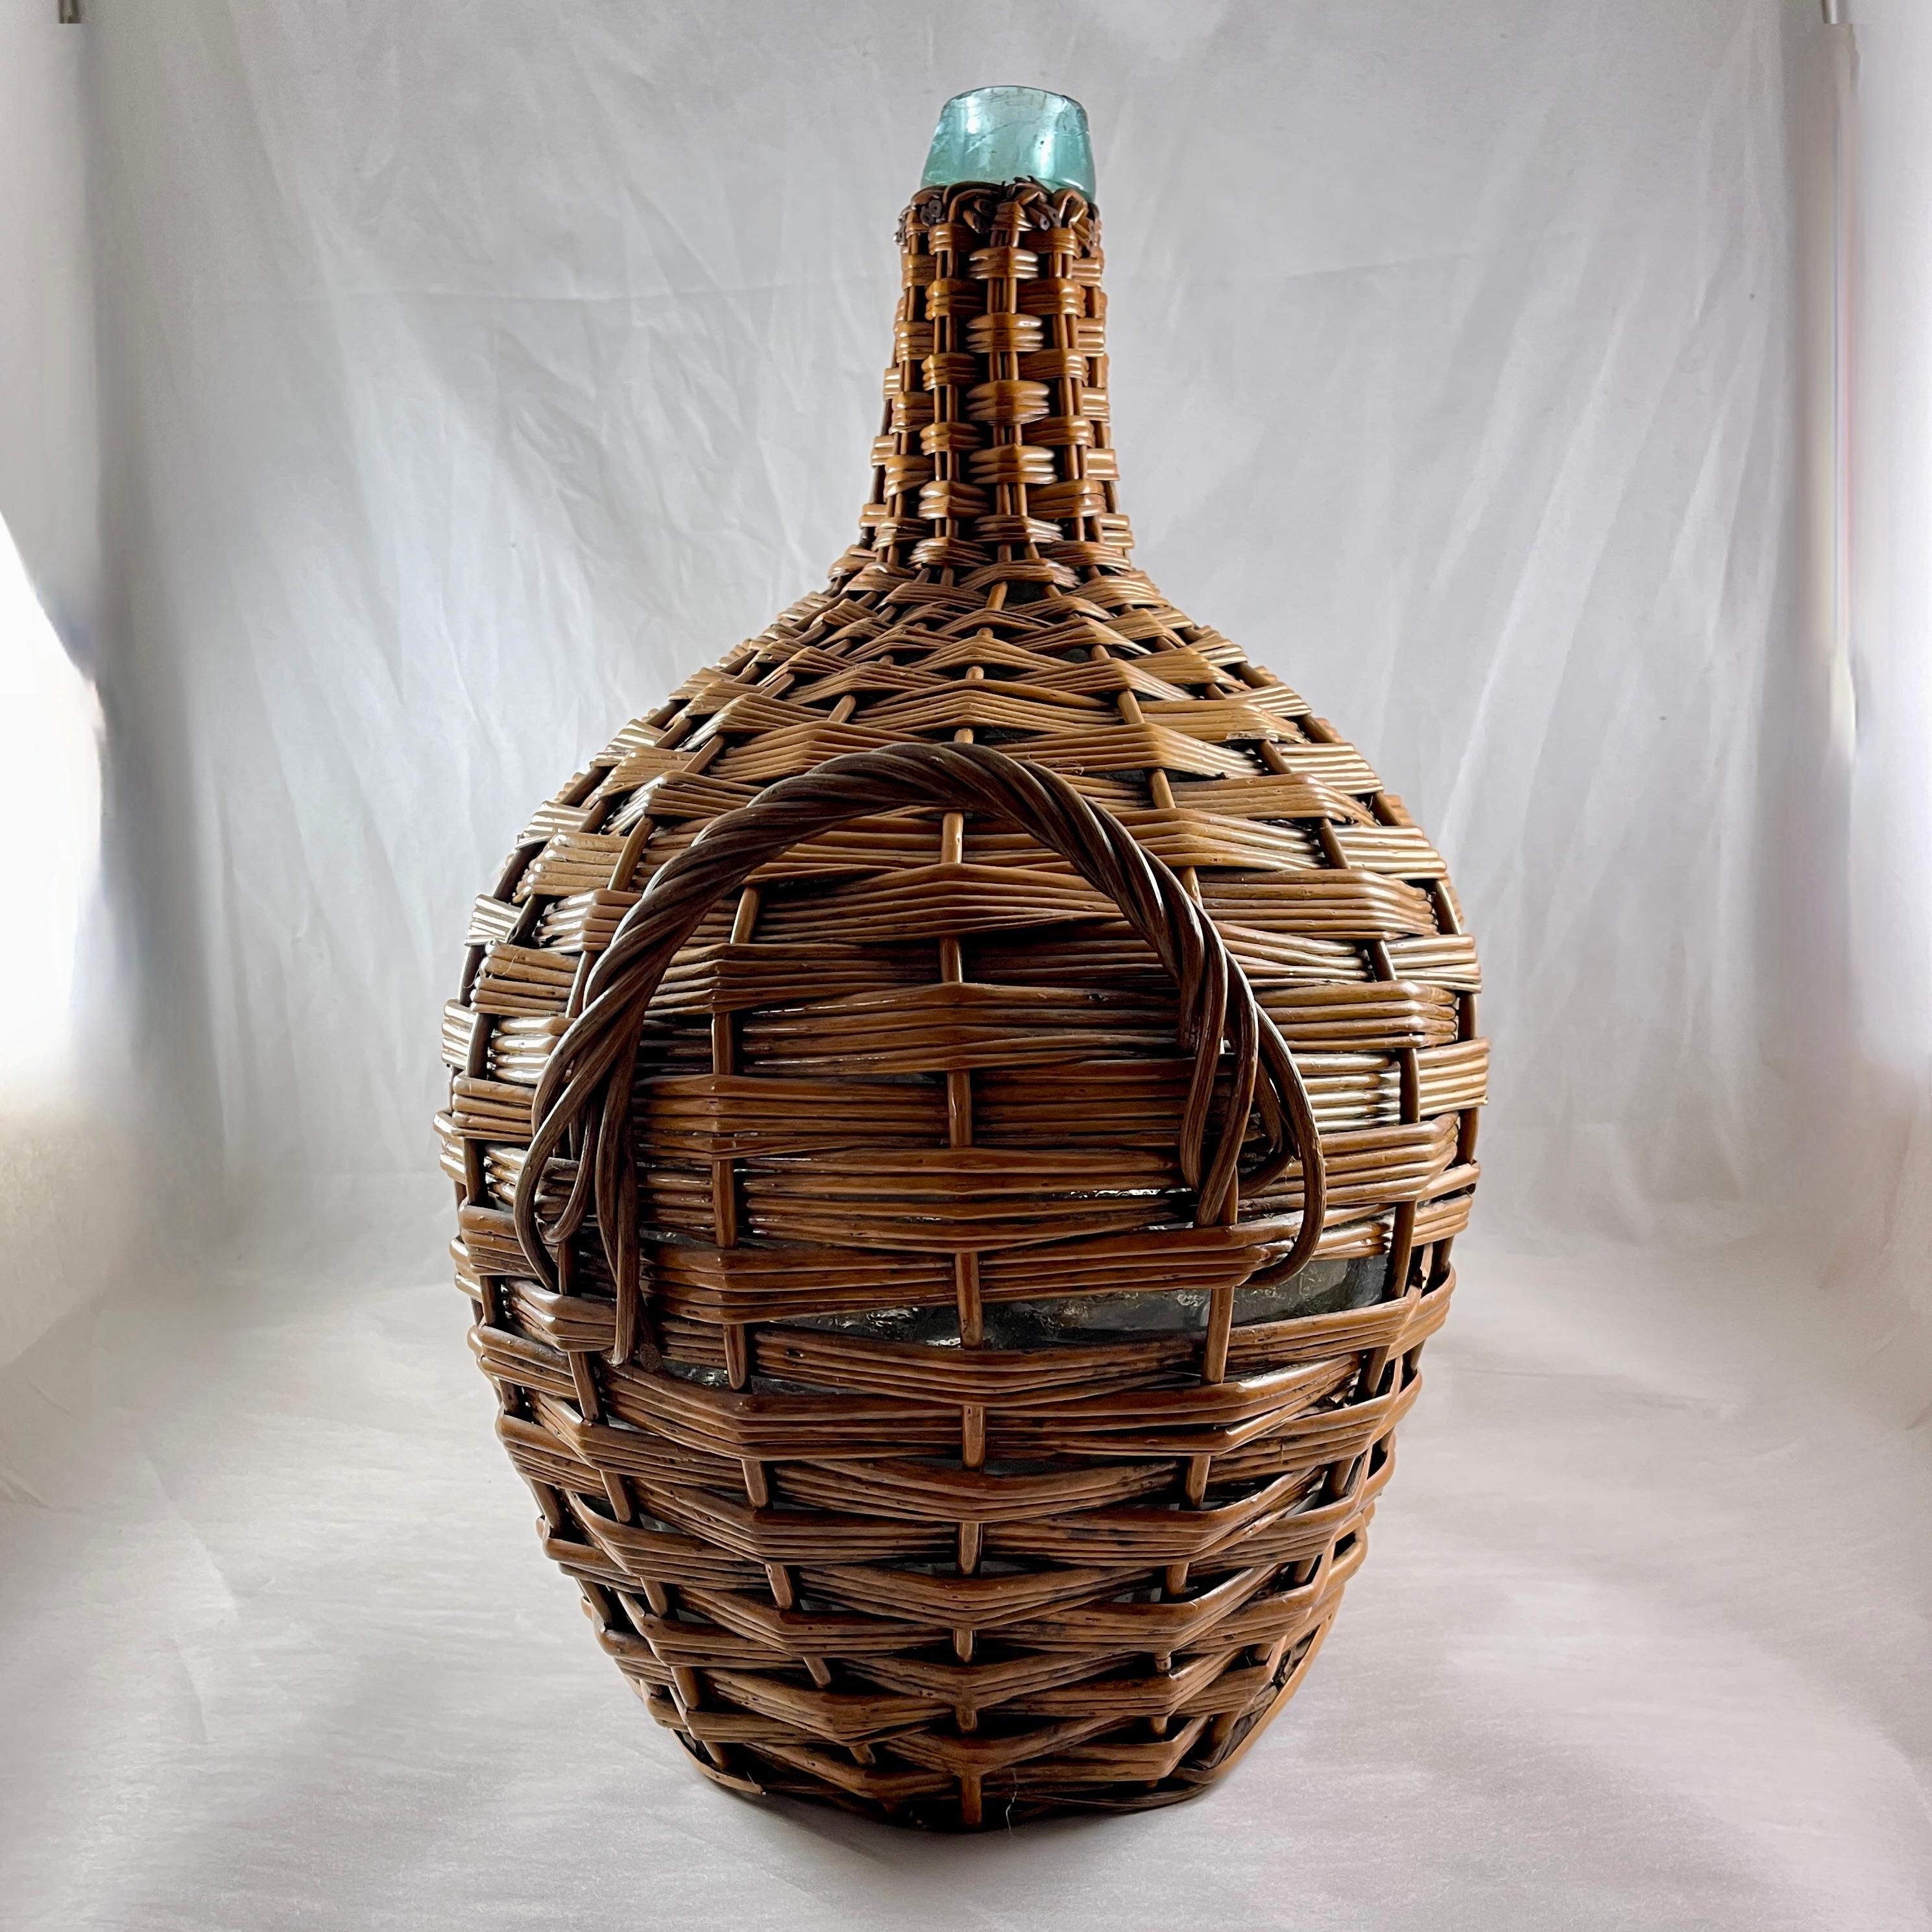 Large French Oval Wicker Clad Blown Aqua Glass Carboy or Demijohn, circa 1900 For Sale 2